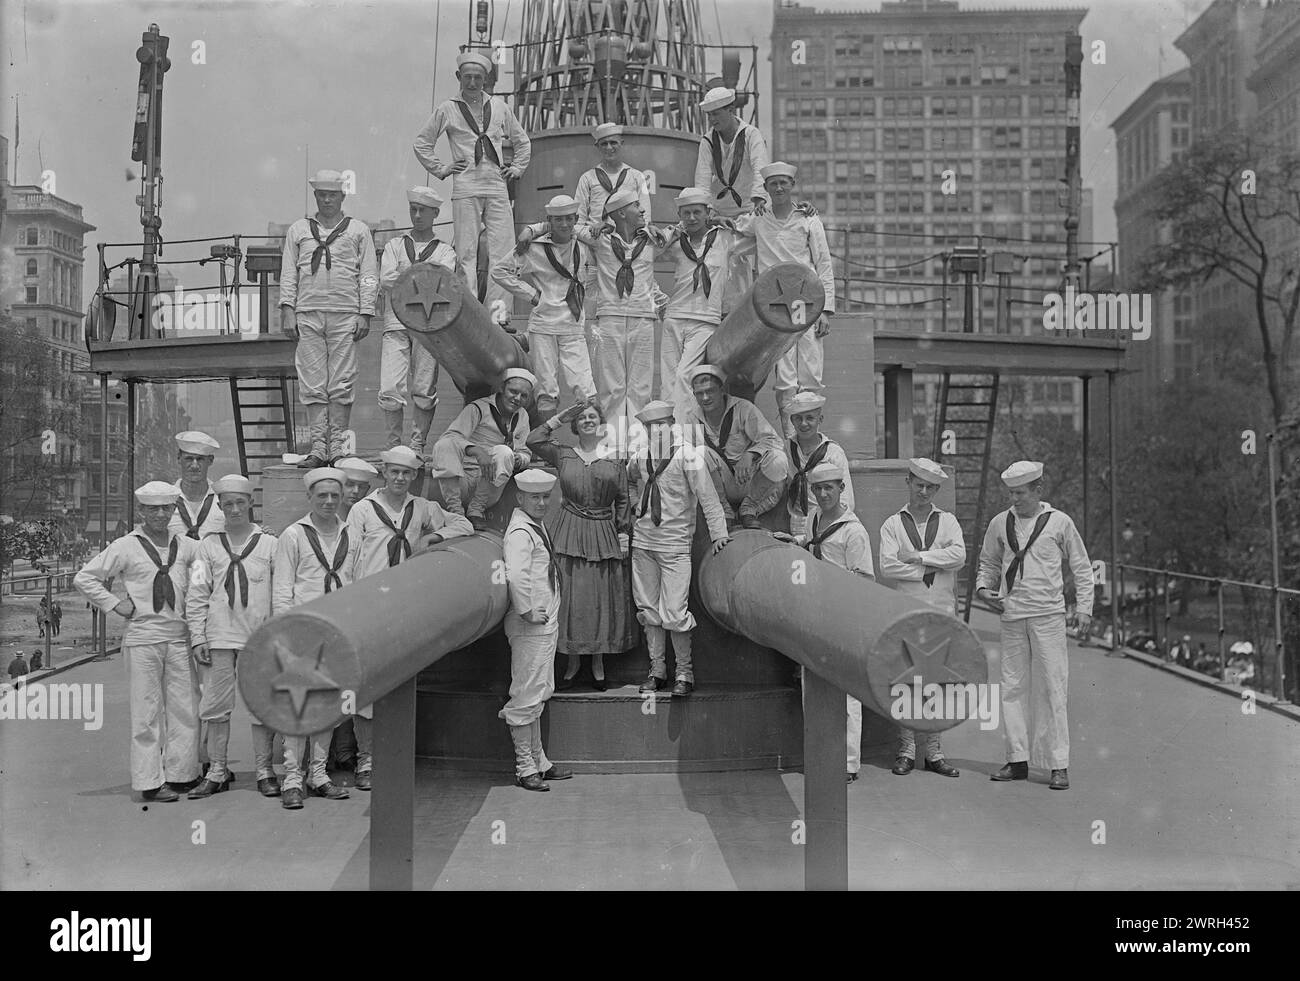 Mabel Garrison on U.S.S. Recruit, 16 Jul 1917. Soprano opera singer Mabel Garrison Siemonn (1886-1963) with sailors on board the U.S.S. Recruit, a wooden mockup of a battleship built in Union Square, New York City by the Navy to recruit seamen and sell Liberty Bonds during World War I. Stock Photo